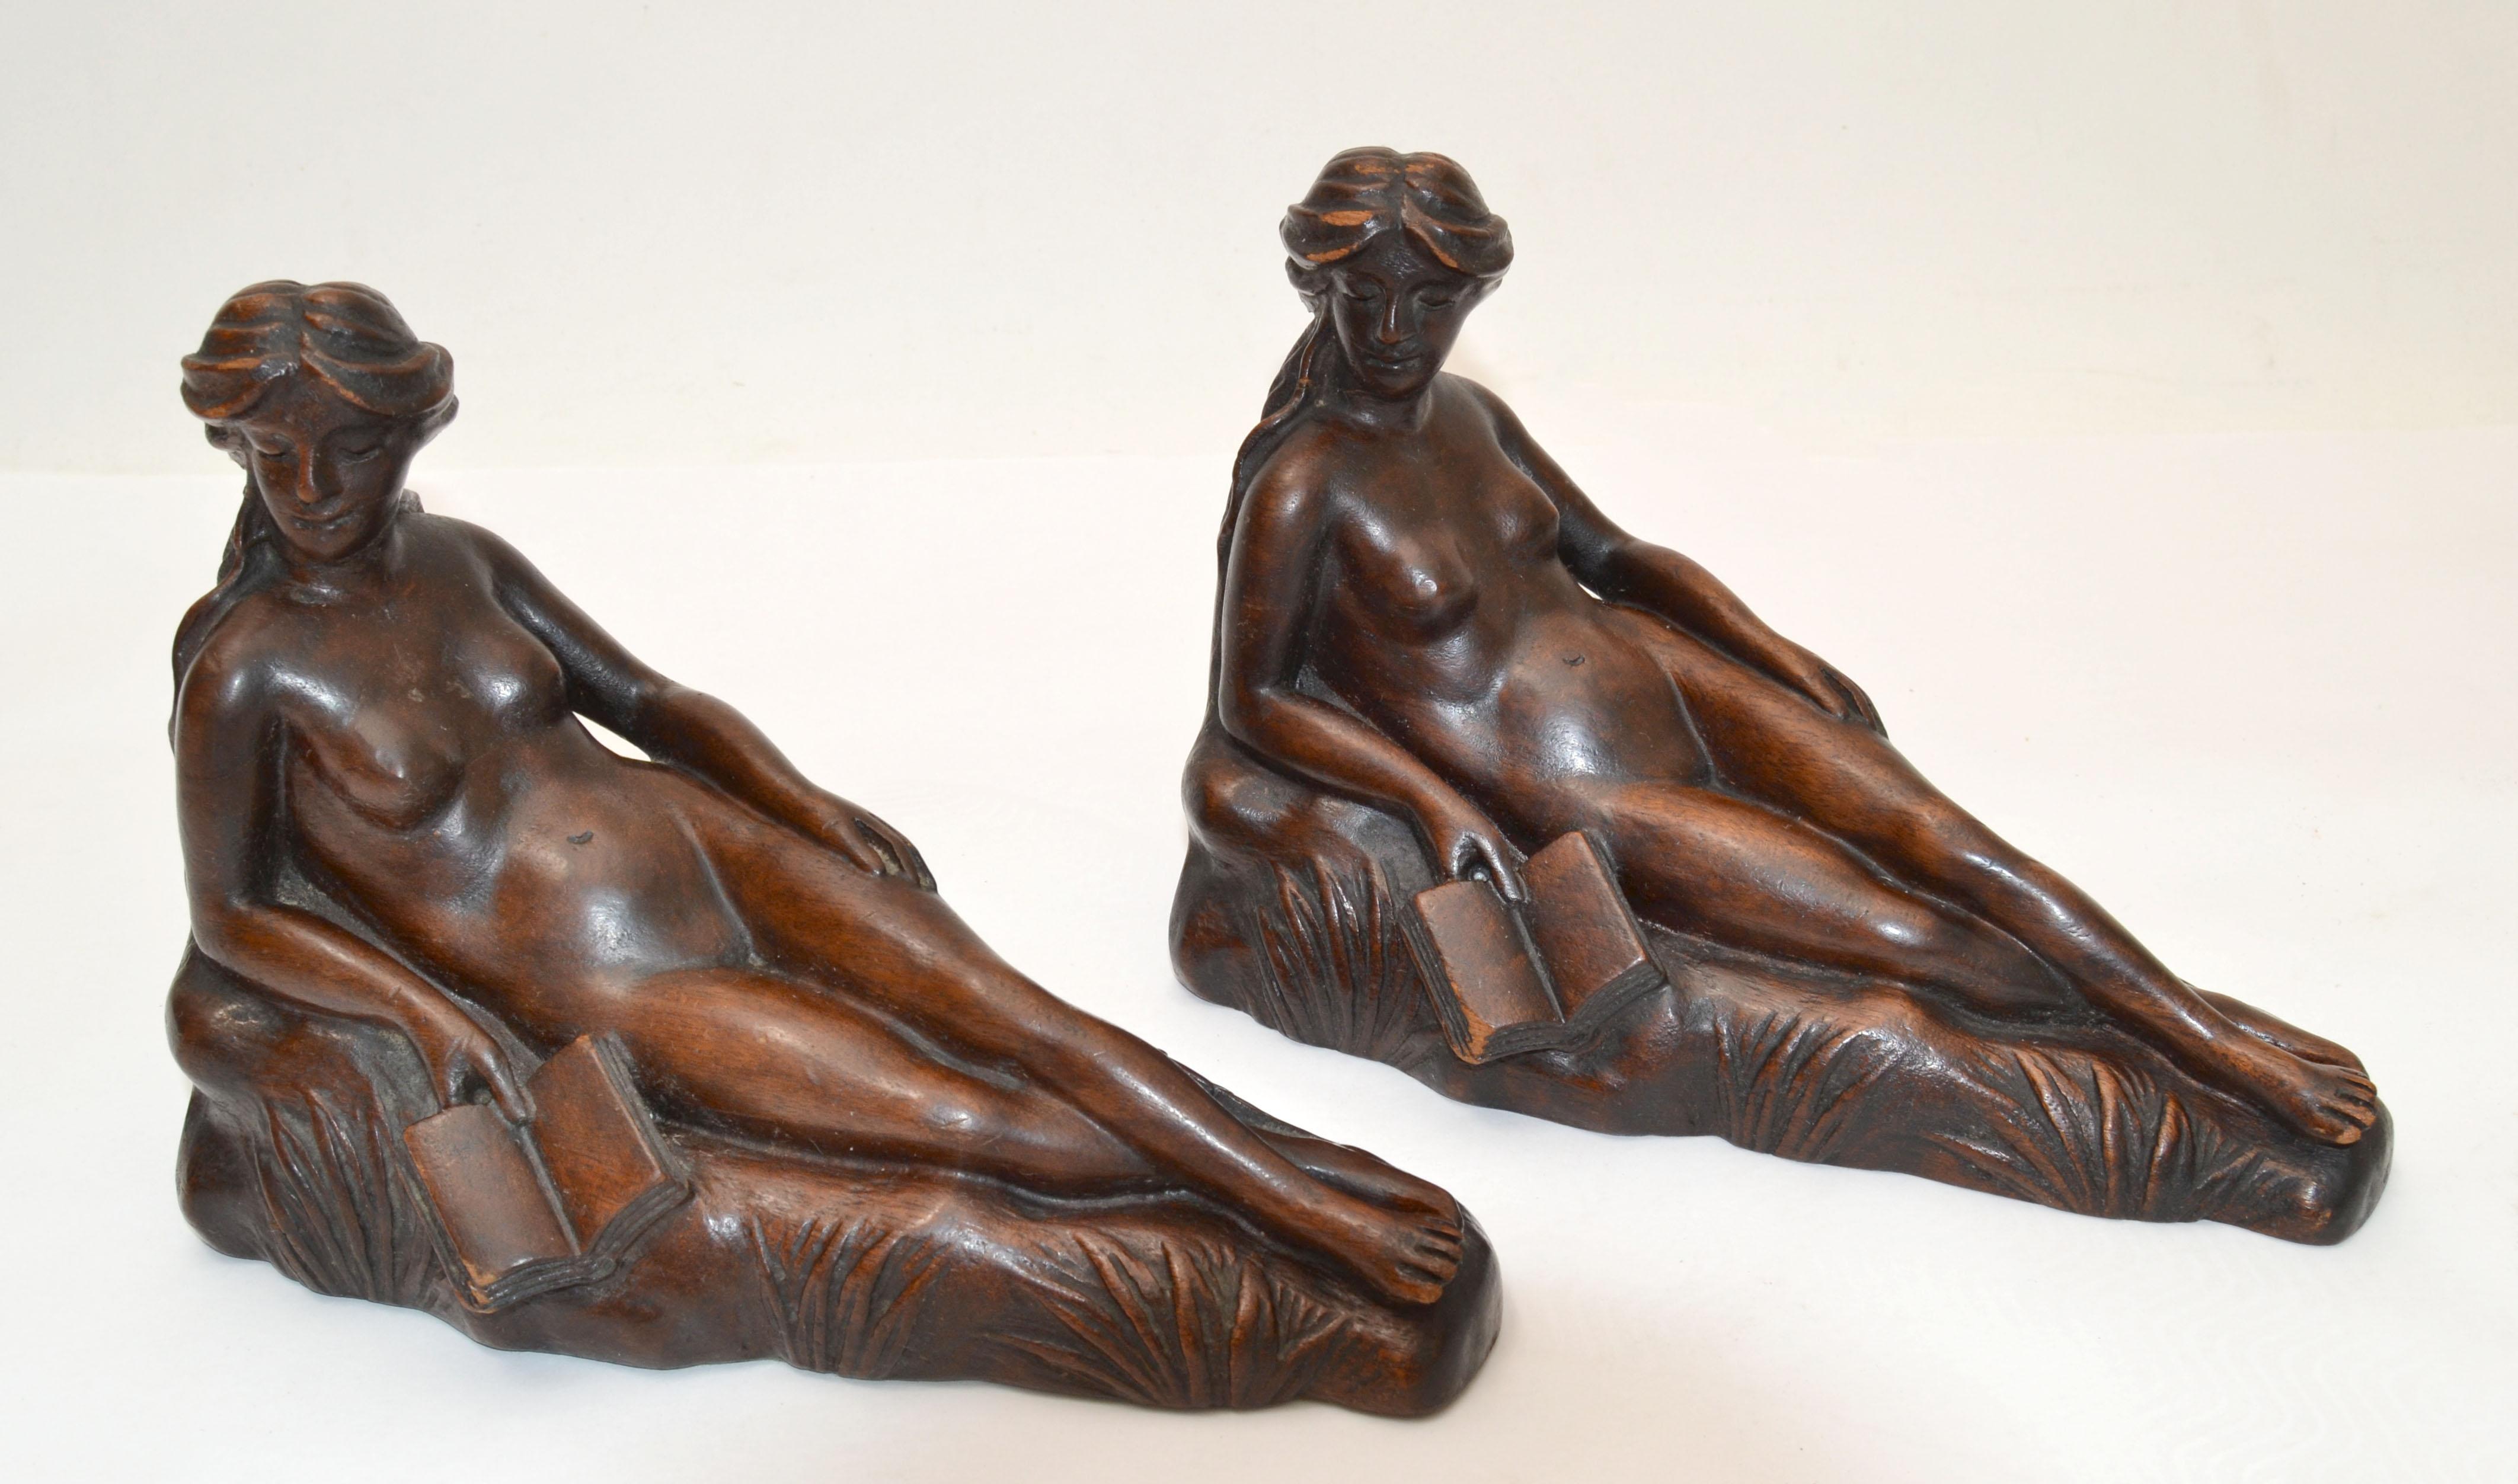 One of a kind Art Nouveau handcrafted carved oak wood Bookends depicting a Nude Female reading a book resting.
Base is covered in green felt.
In good original vintage condition with minor fading of the oak wood.